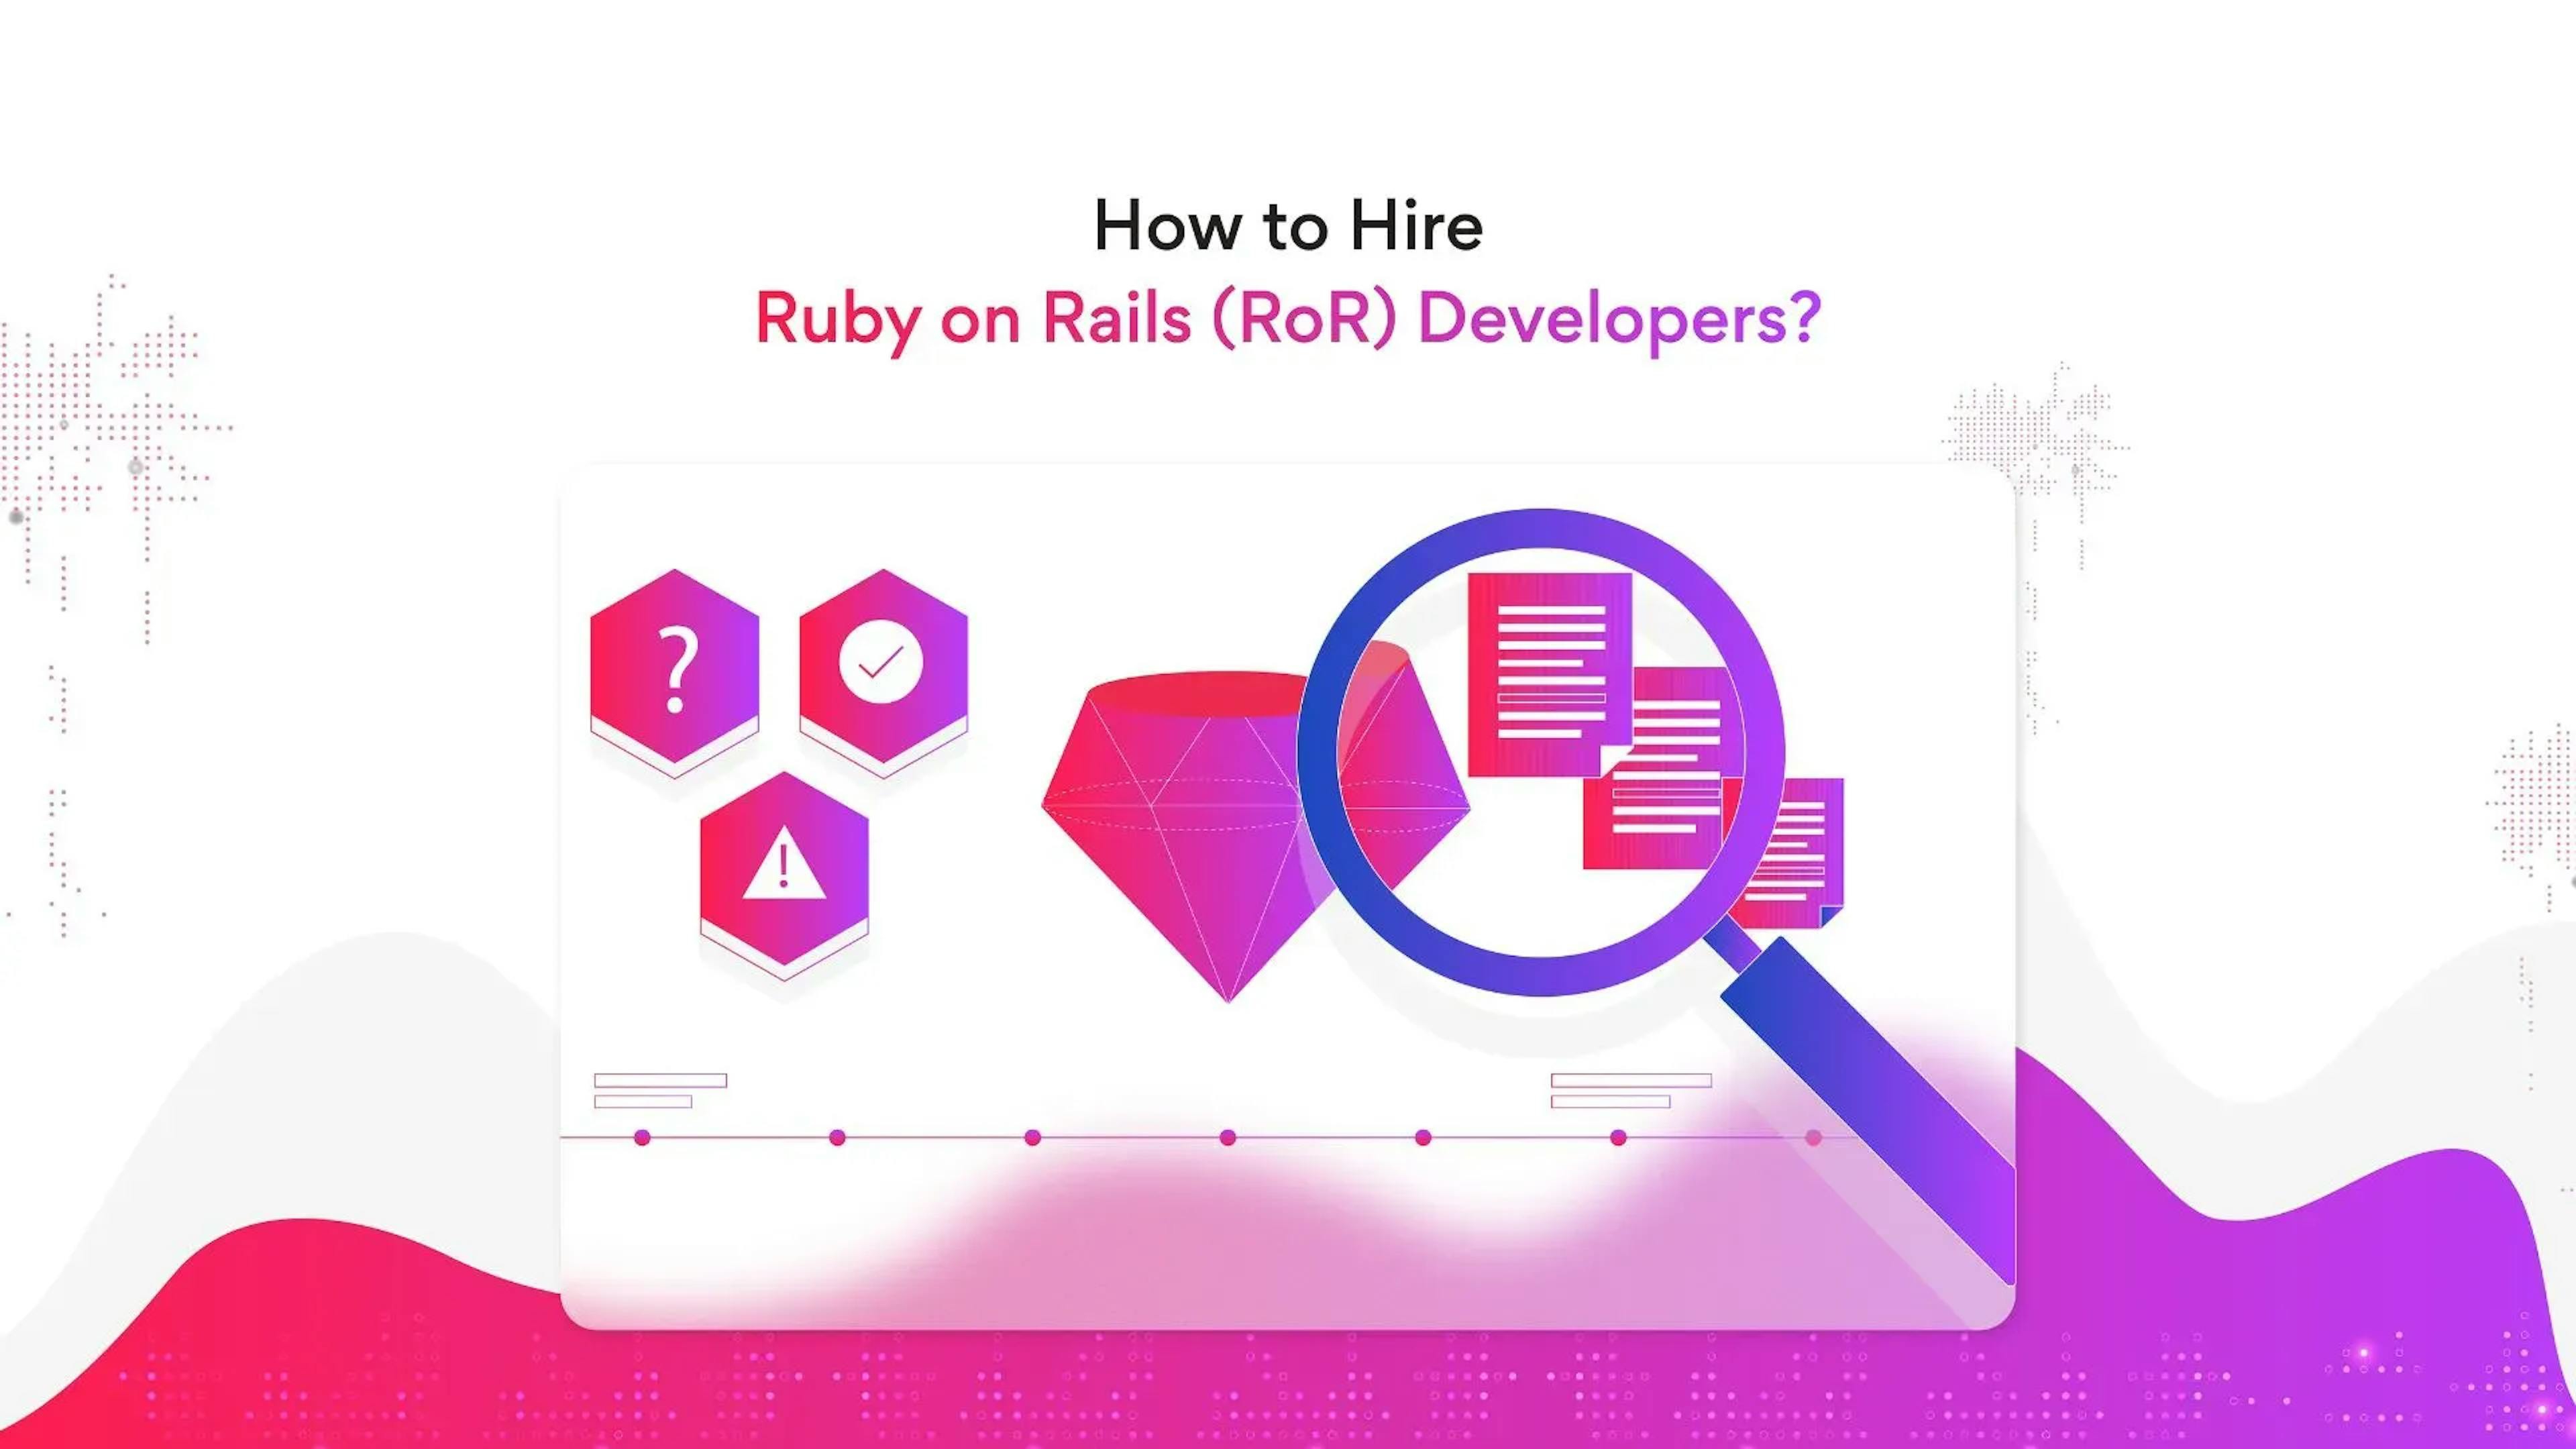 How to Hire Ruby on Rails (RoR) Developers?